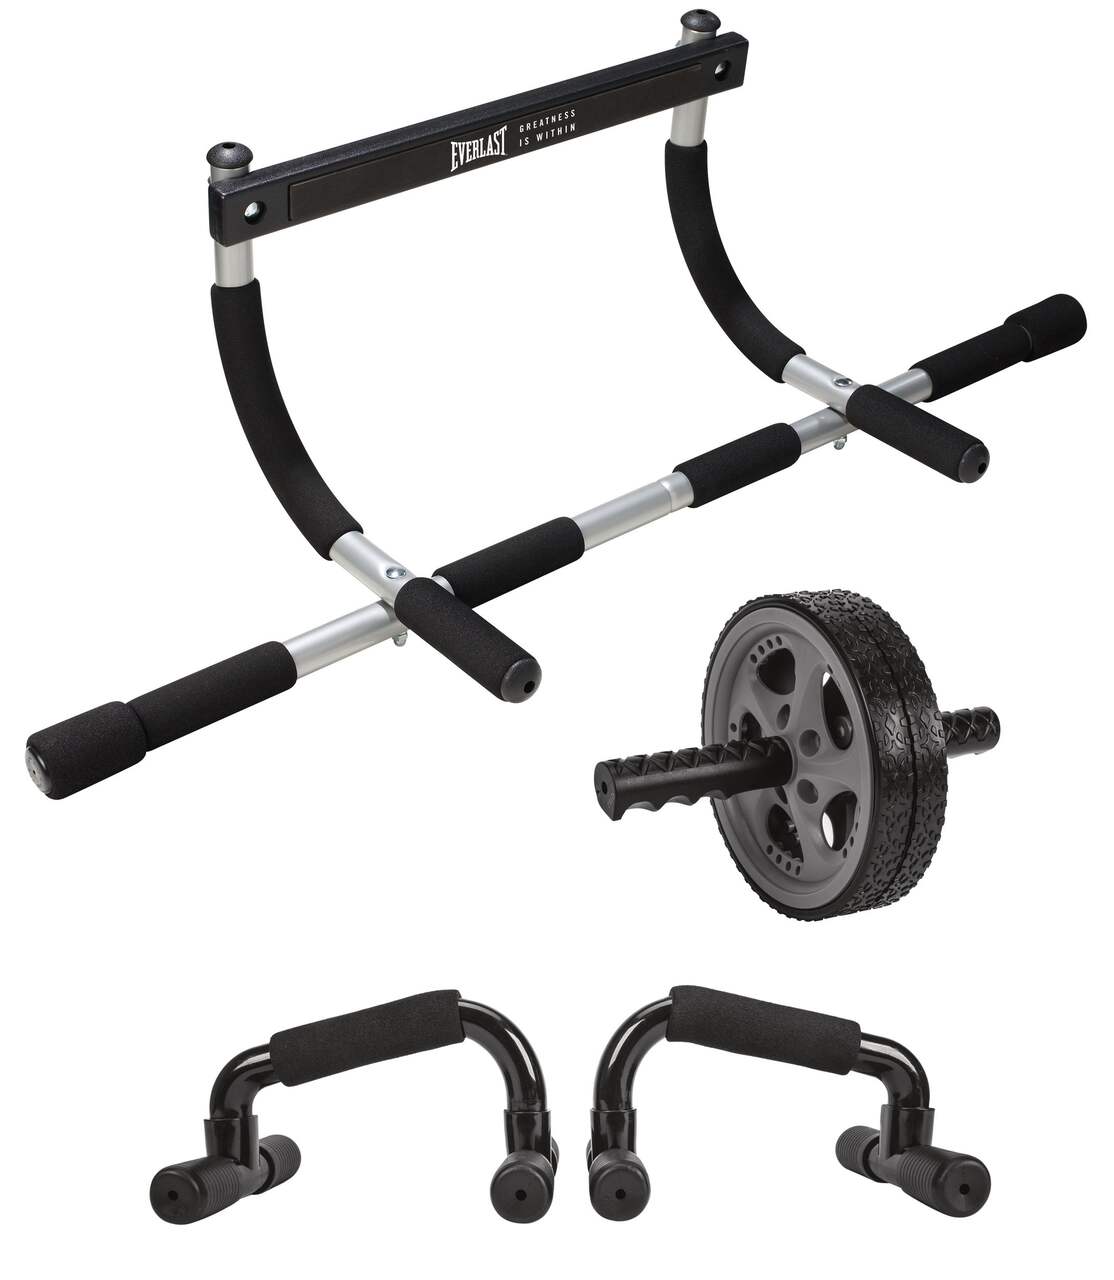 https://media-www.canadiantire.ca/product/playing/exercise/exercise-accessories/1841213/everlast-total-body-workout-bundle-135bc619-89d2-40f4-a041-c2cc79f94935-jpgrendition.jpg?imdensity=1&imwidth=640&impolicy=mZoom